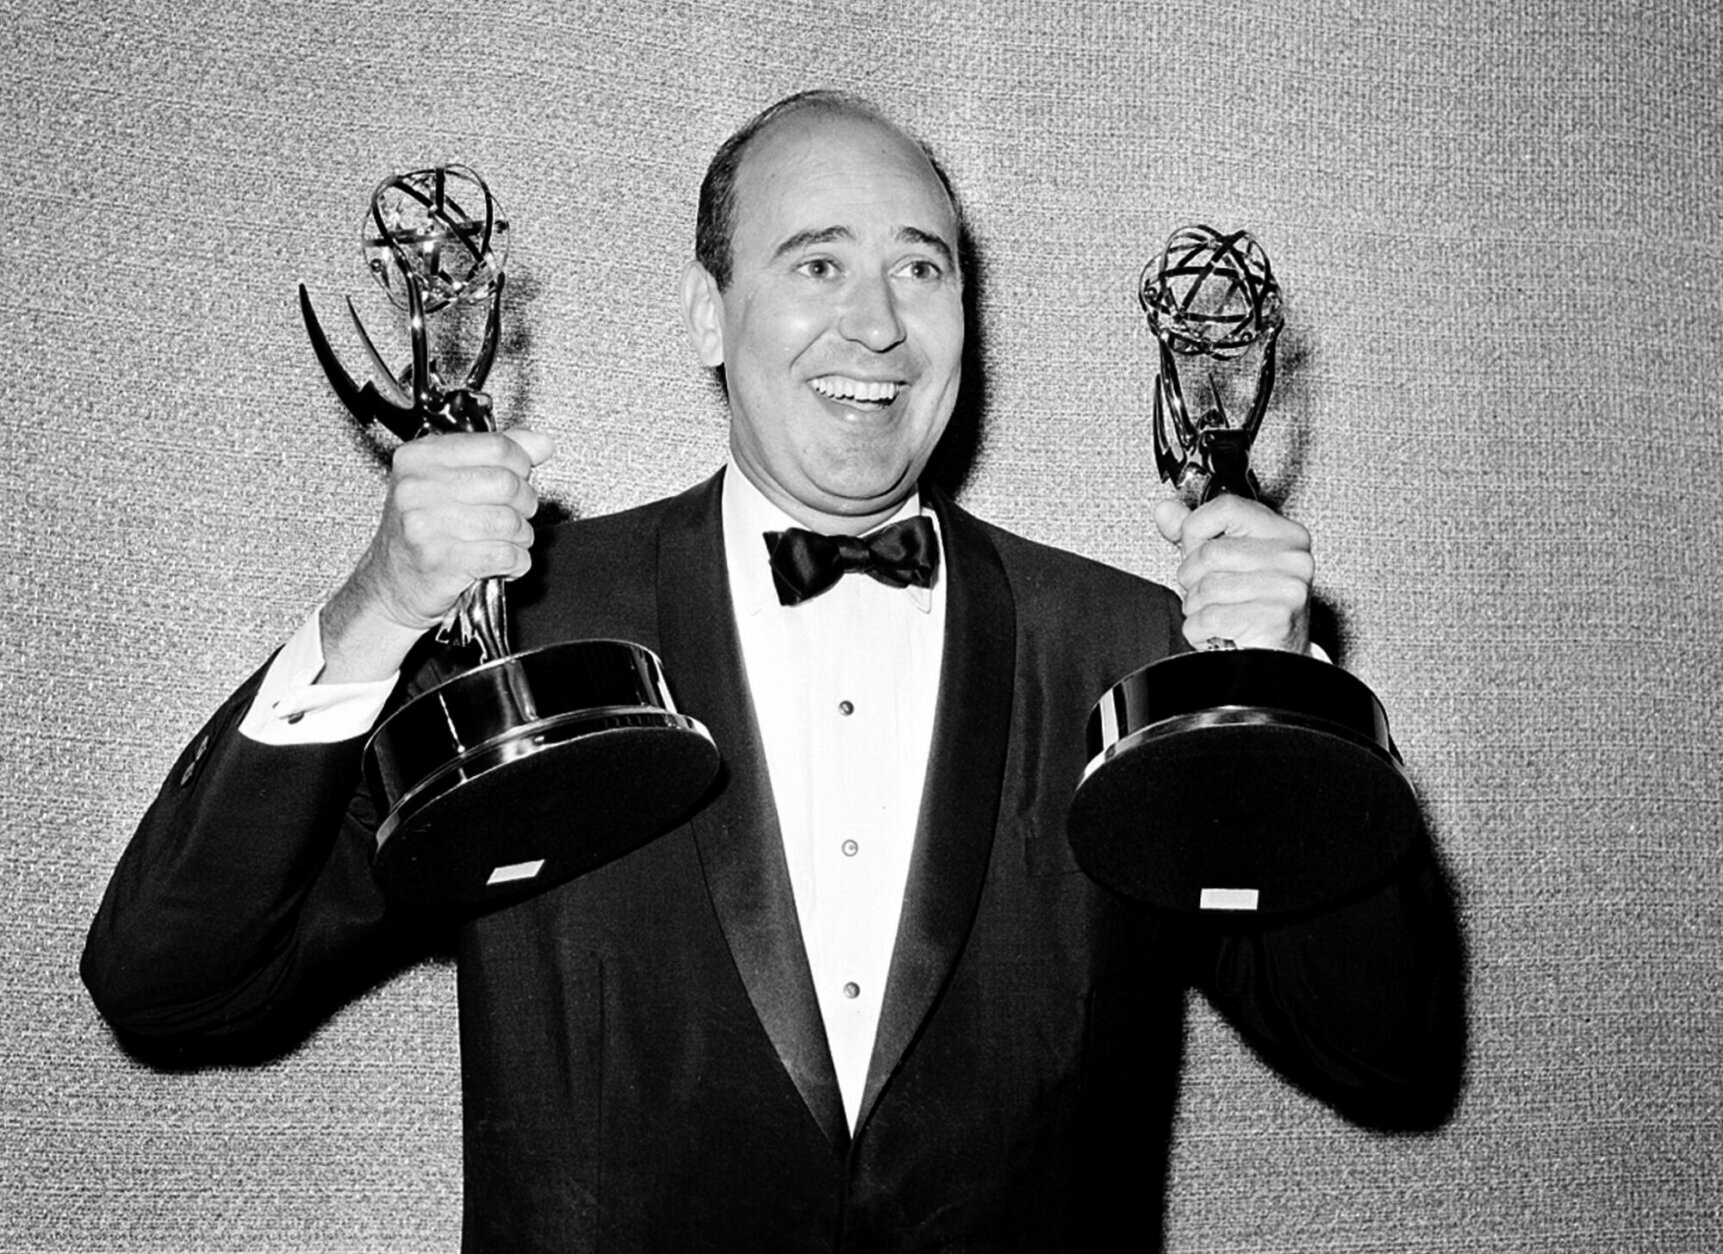 In this May 26, 1963 file photo, Carl Reiner shows holds two Emmy statuettes presented to him as best comedy writer for the "Dick Van Dyke Show," during the annual Emmy Awards presentation in Los Angeles. Reiner, the ingenious and versatile writer, actor and director who broke through as a “second banana” to Sid Caesar and rose to comedy’s front ranks as creator of “The Dick Van Dyke Show” and straight man to Mel Brooks’ “2000 Year Old Man,” has died, according to reports. Variety reported he died of natural causes on Monday night, June 29, 2020, at his home in Beverly Hills, Calif. He was 98. (AP Photo, File)